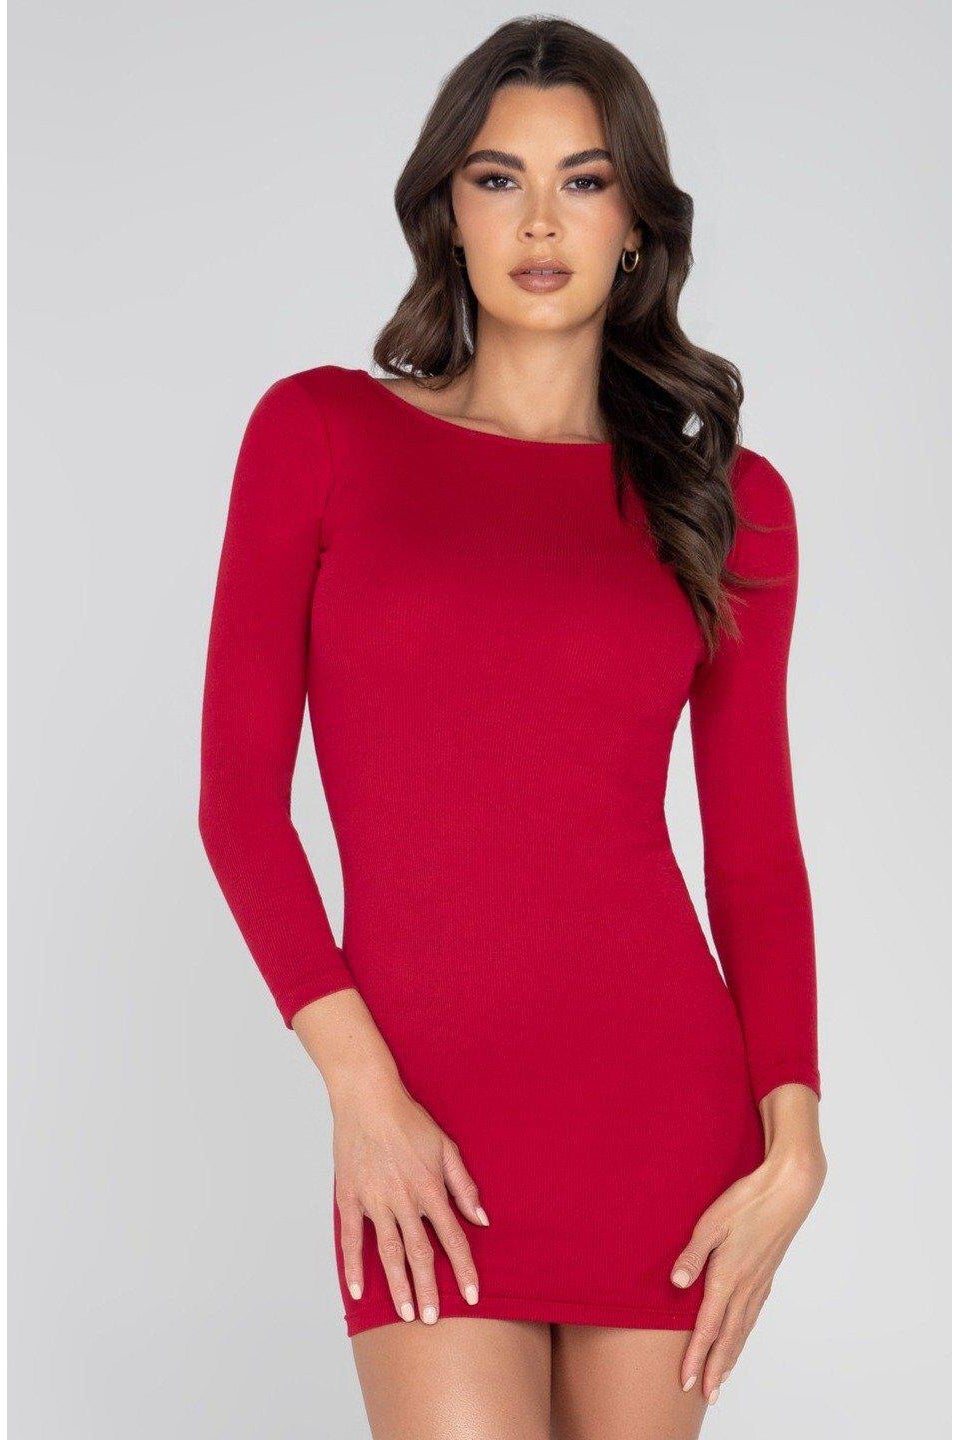 Classic Ribbed Long sleeve Bodycon Dress-Club Dresses-Roma Confidential-Red-L-SEXYSHOES.COM